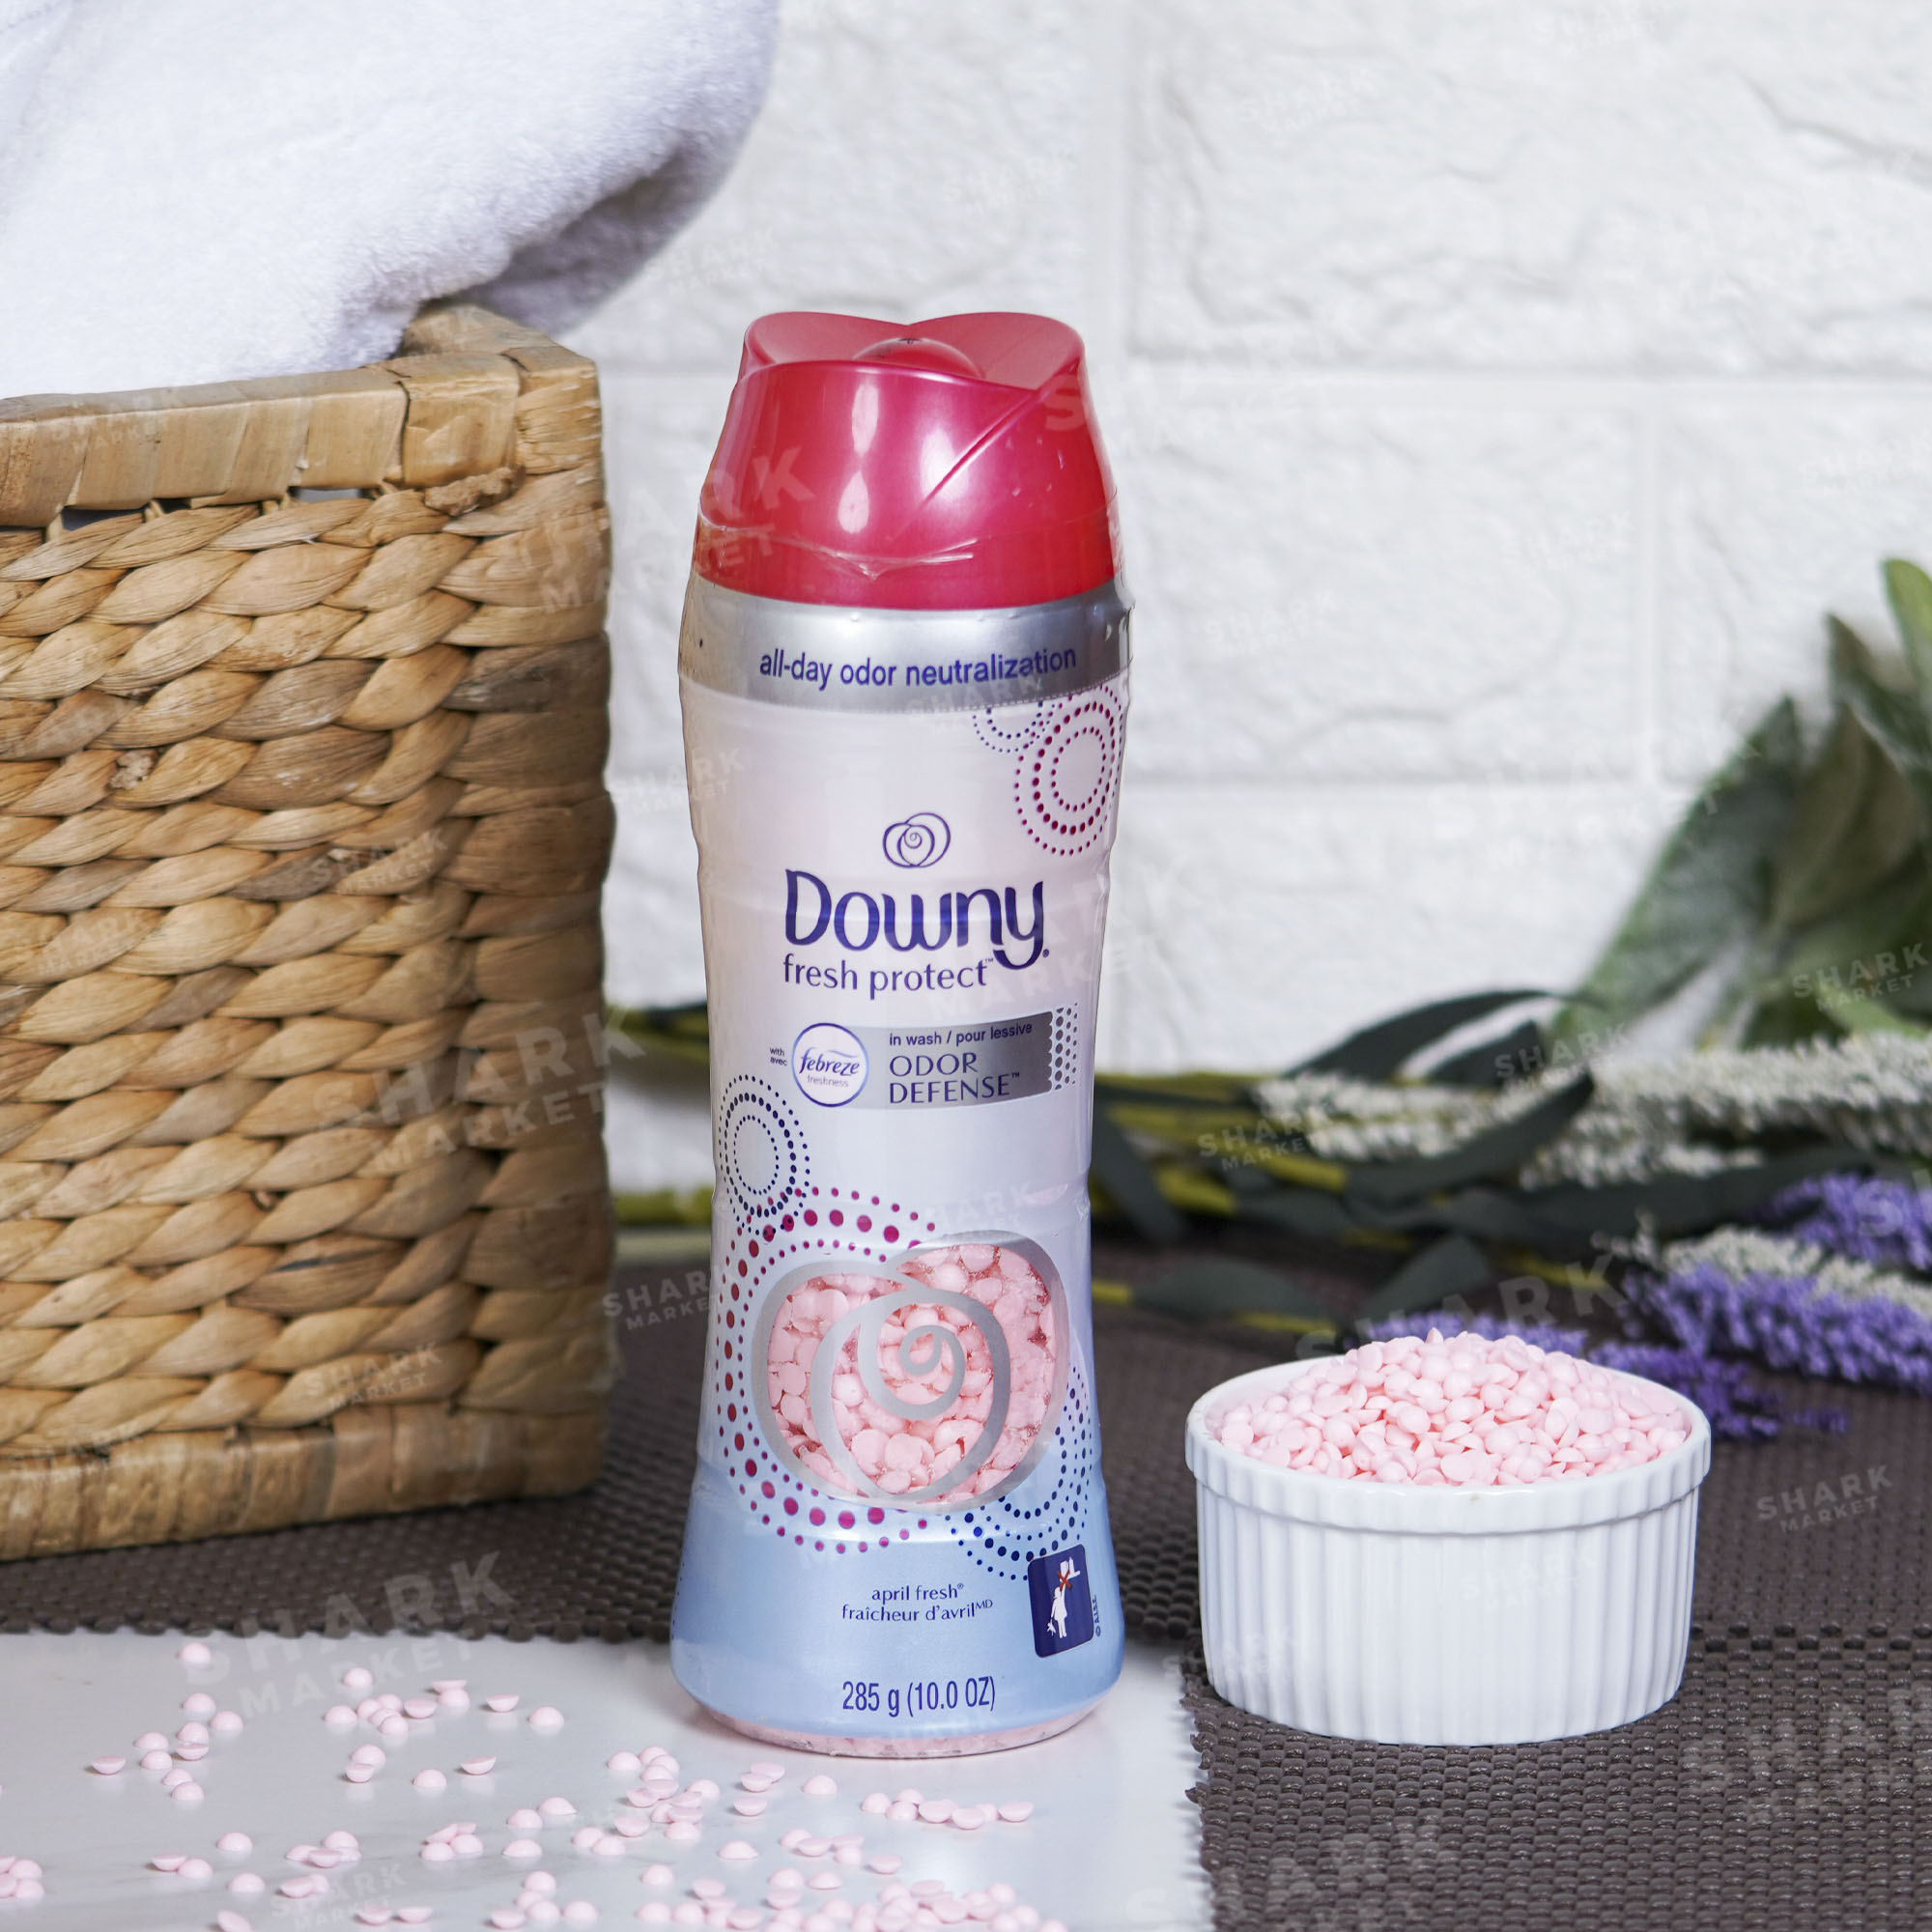 Downy Fresh Protect April Fresh Scent Beads